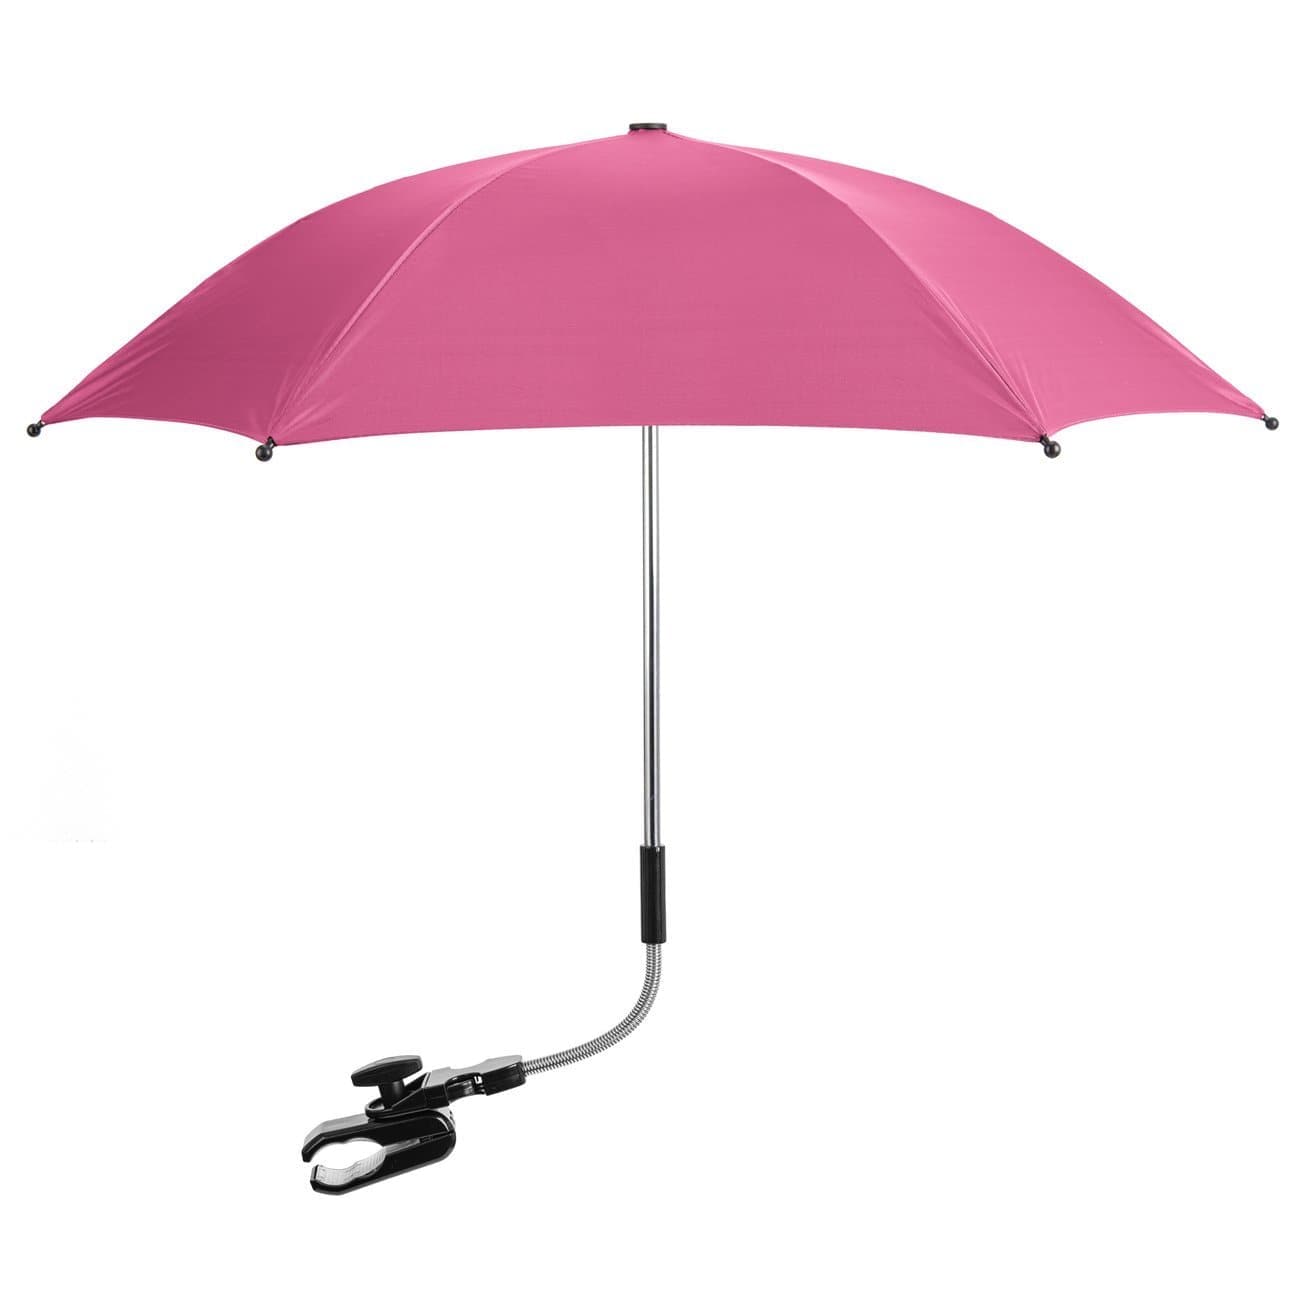 Baby Parasol Compatible With Mamas & Papas - Fits All Models - For Your Little One